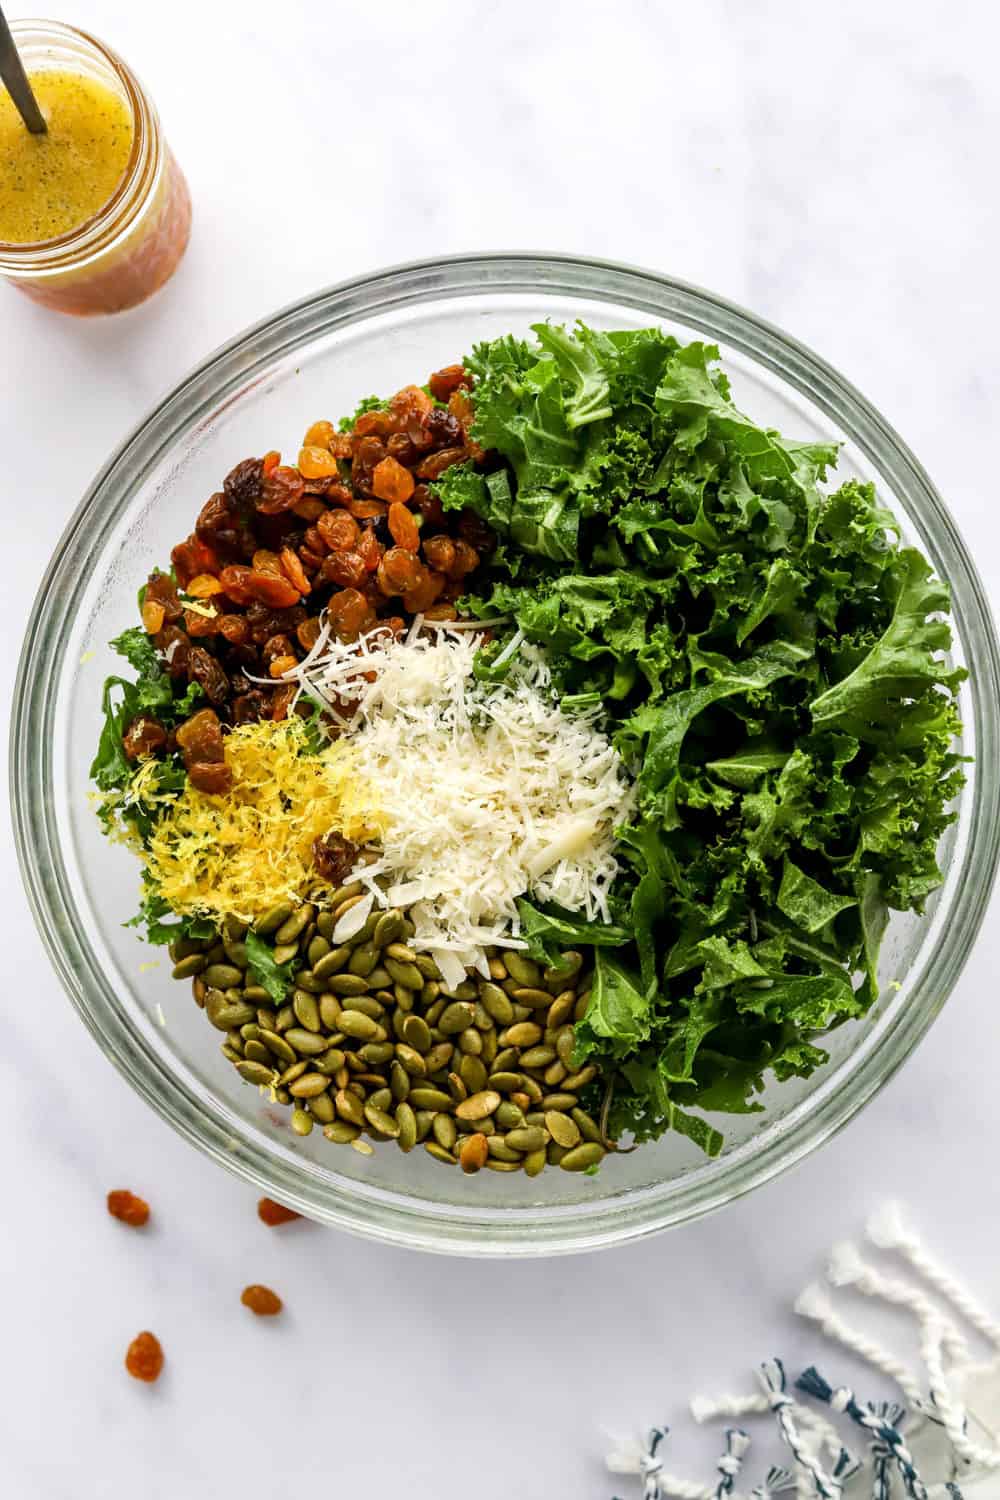 Round serving bowl with green kale, pumpkin seeds, lemon zest, shredded parmesan cheese and golden raisins in it with salad dressing in a jar behind it